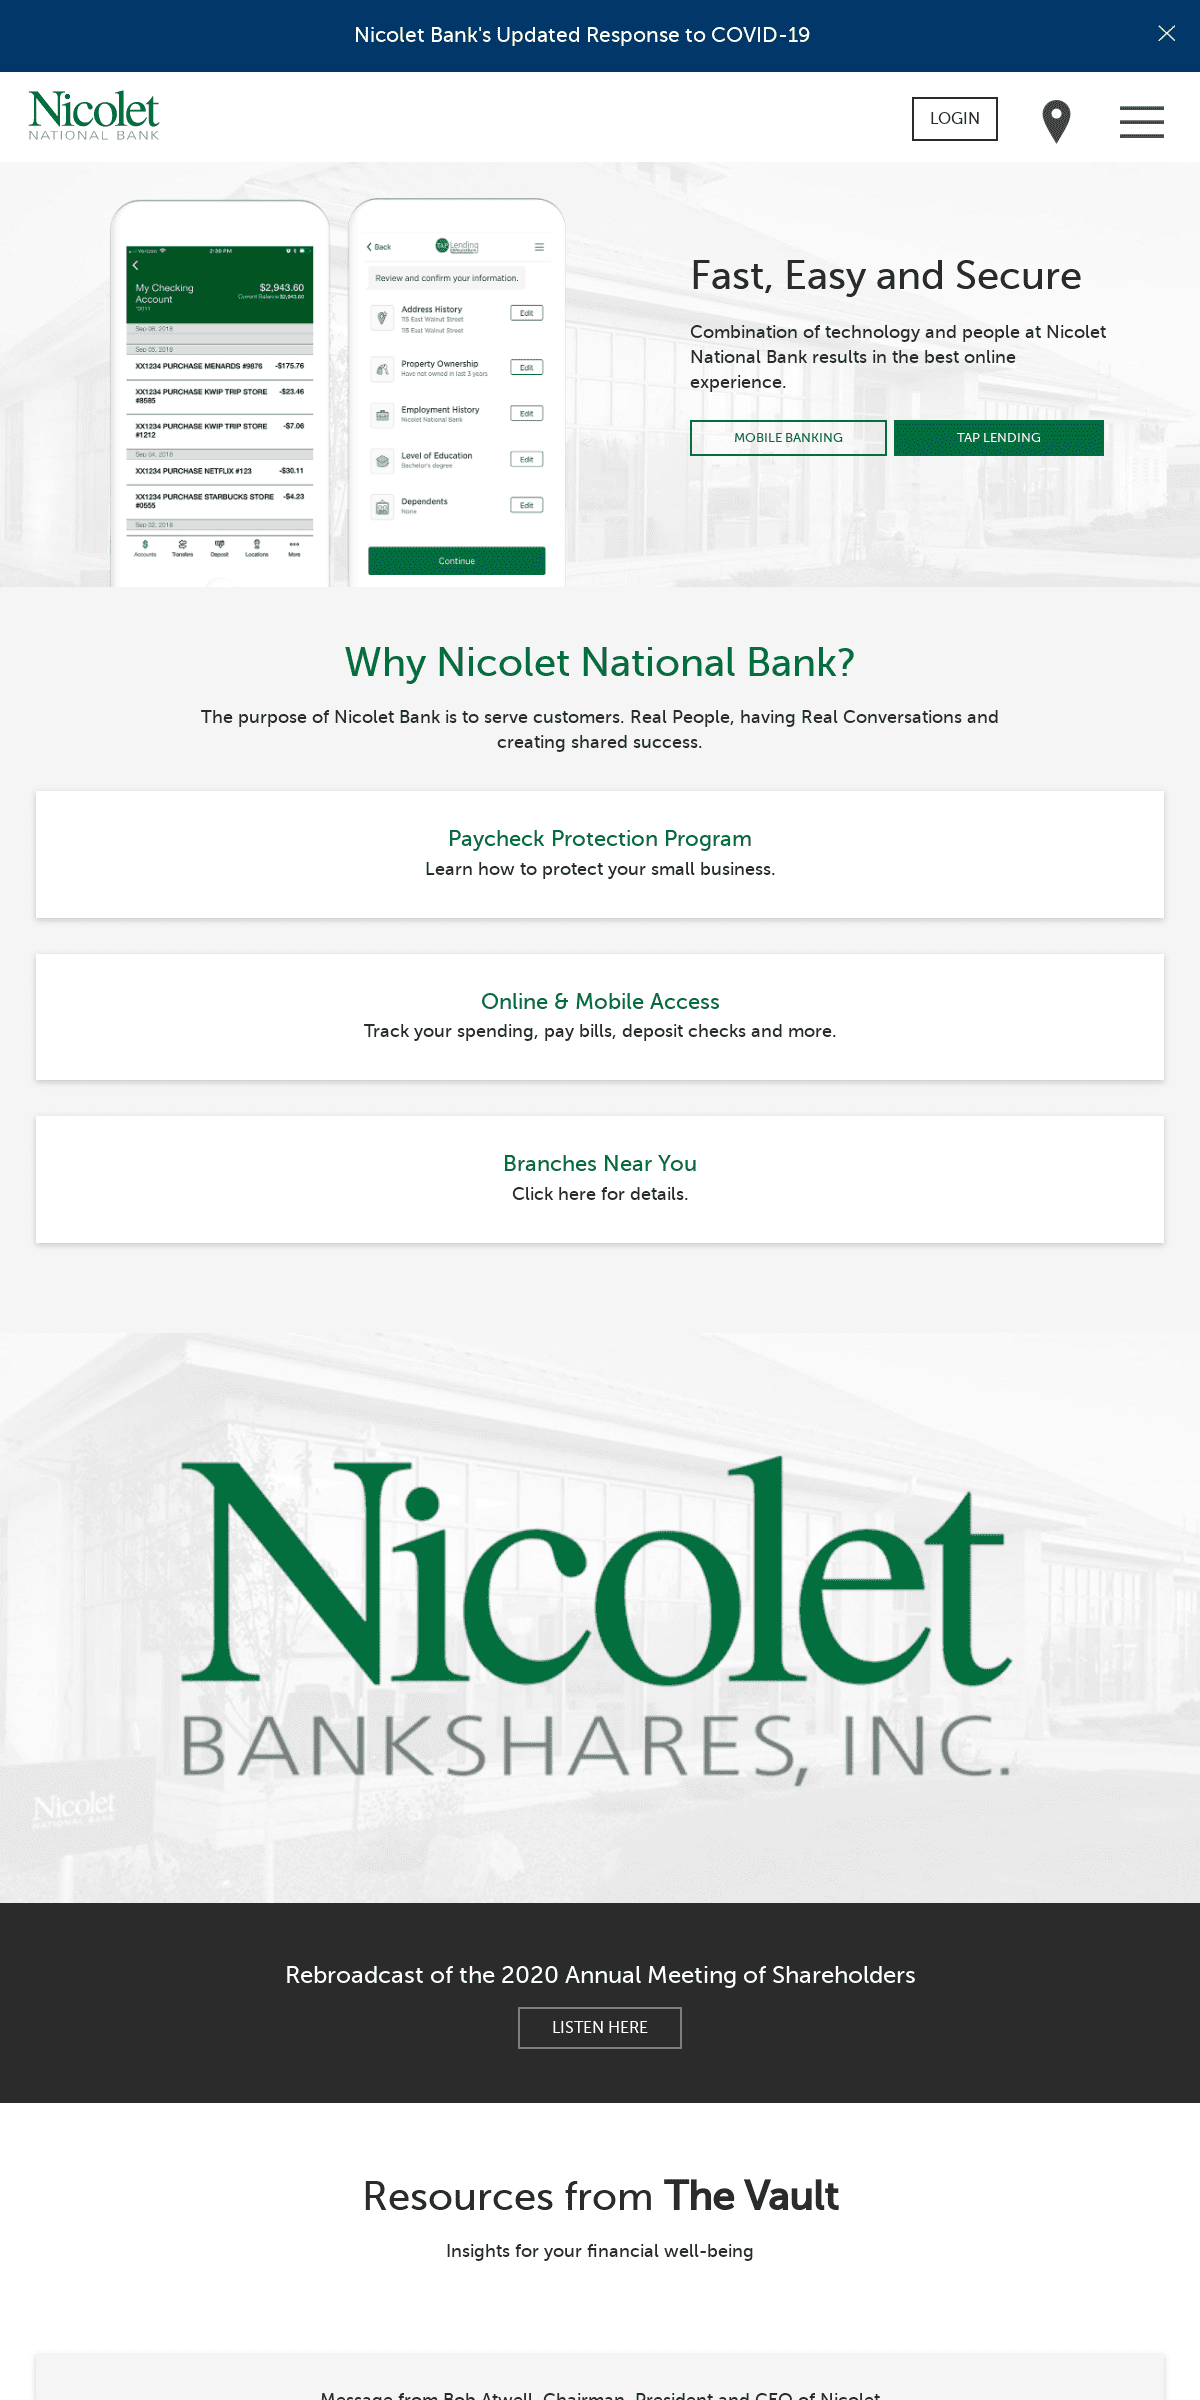 A complete backup of nicoletbank.com